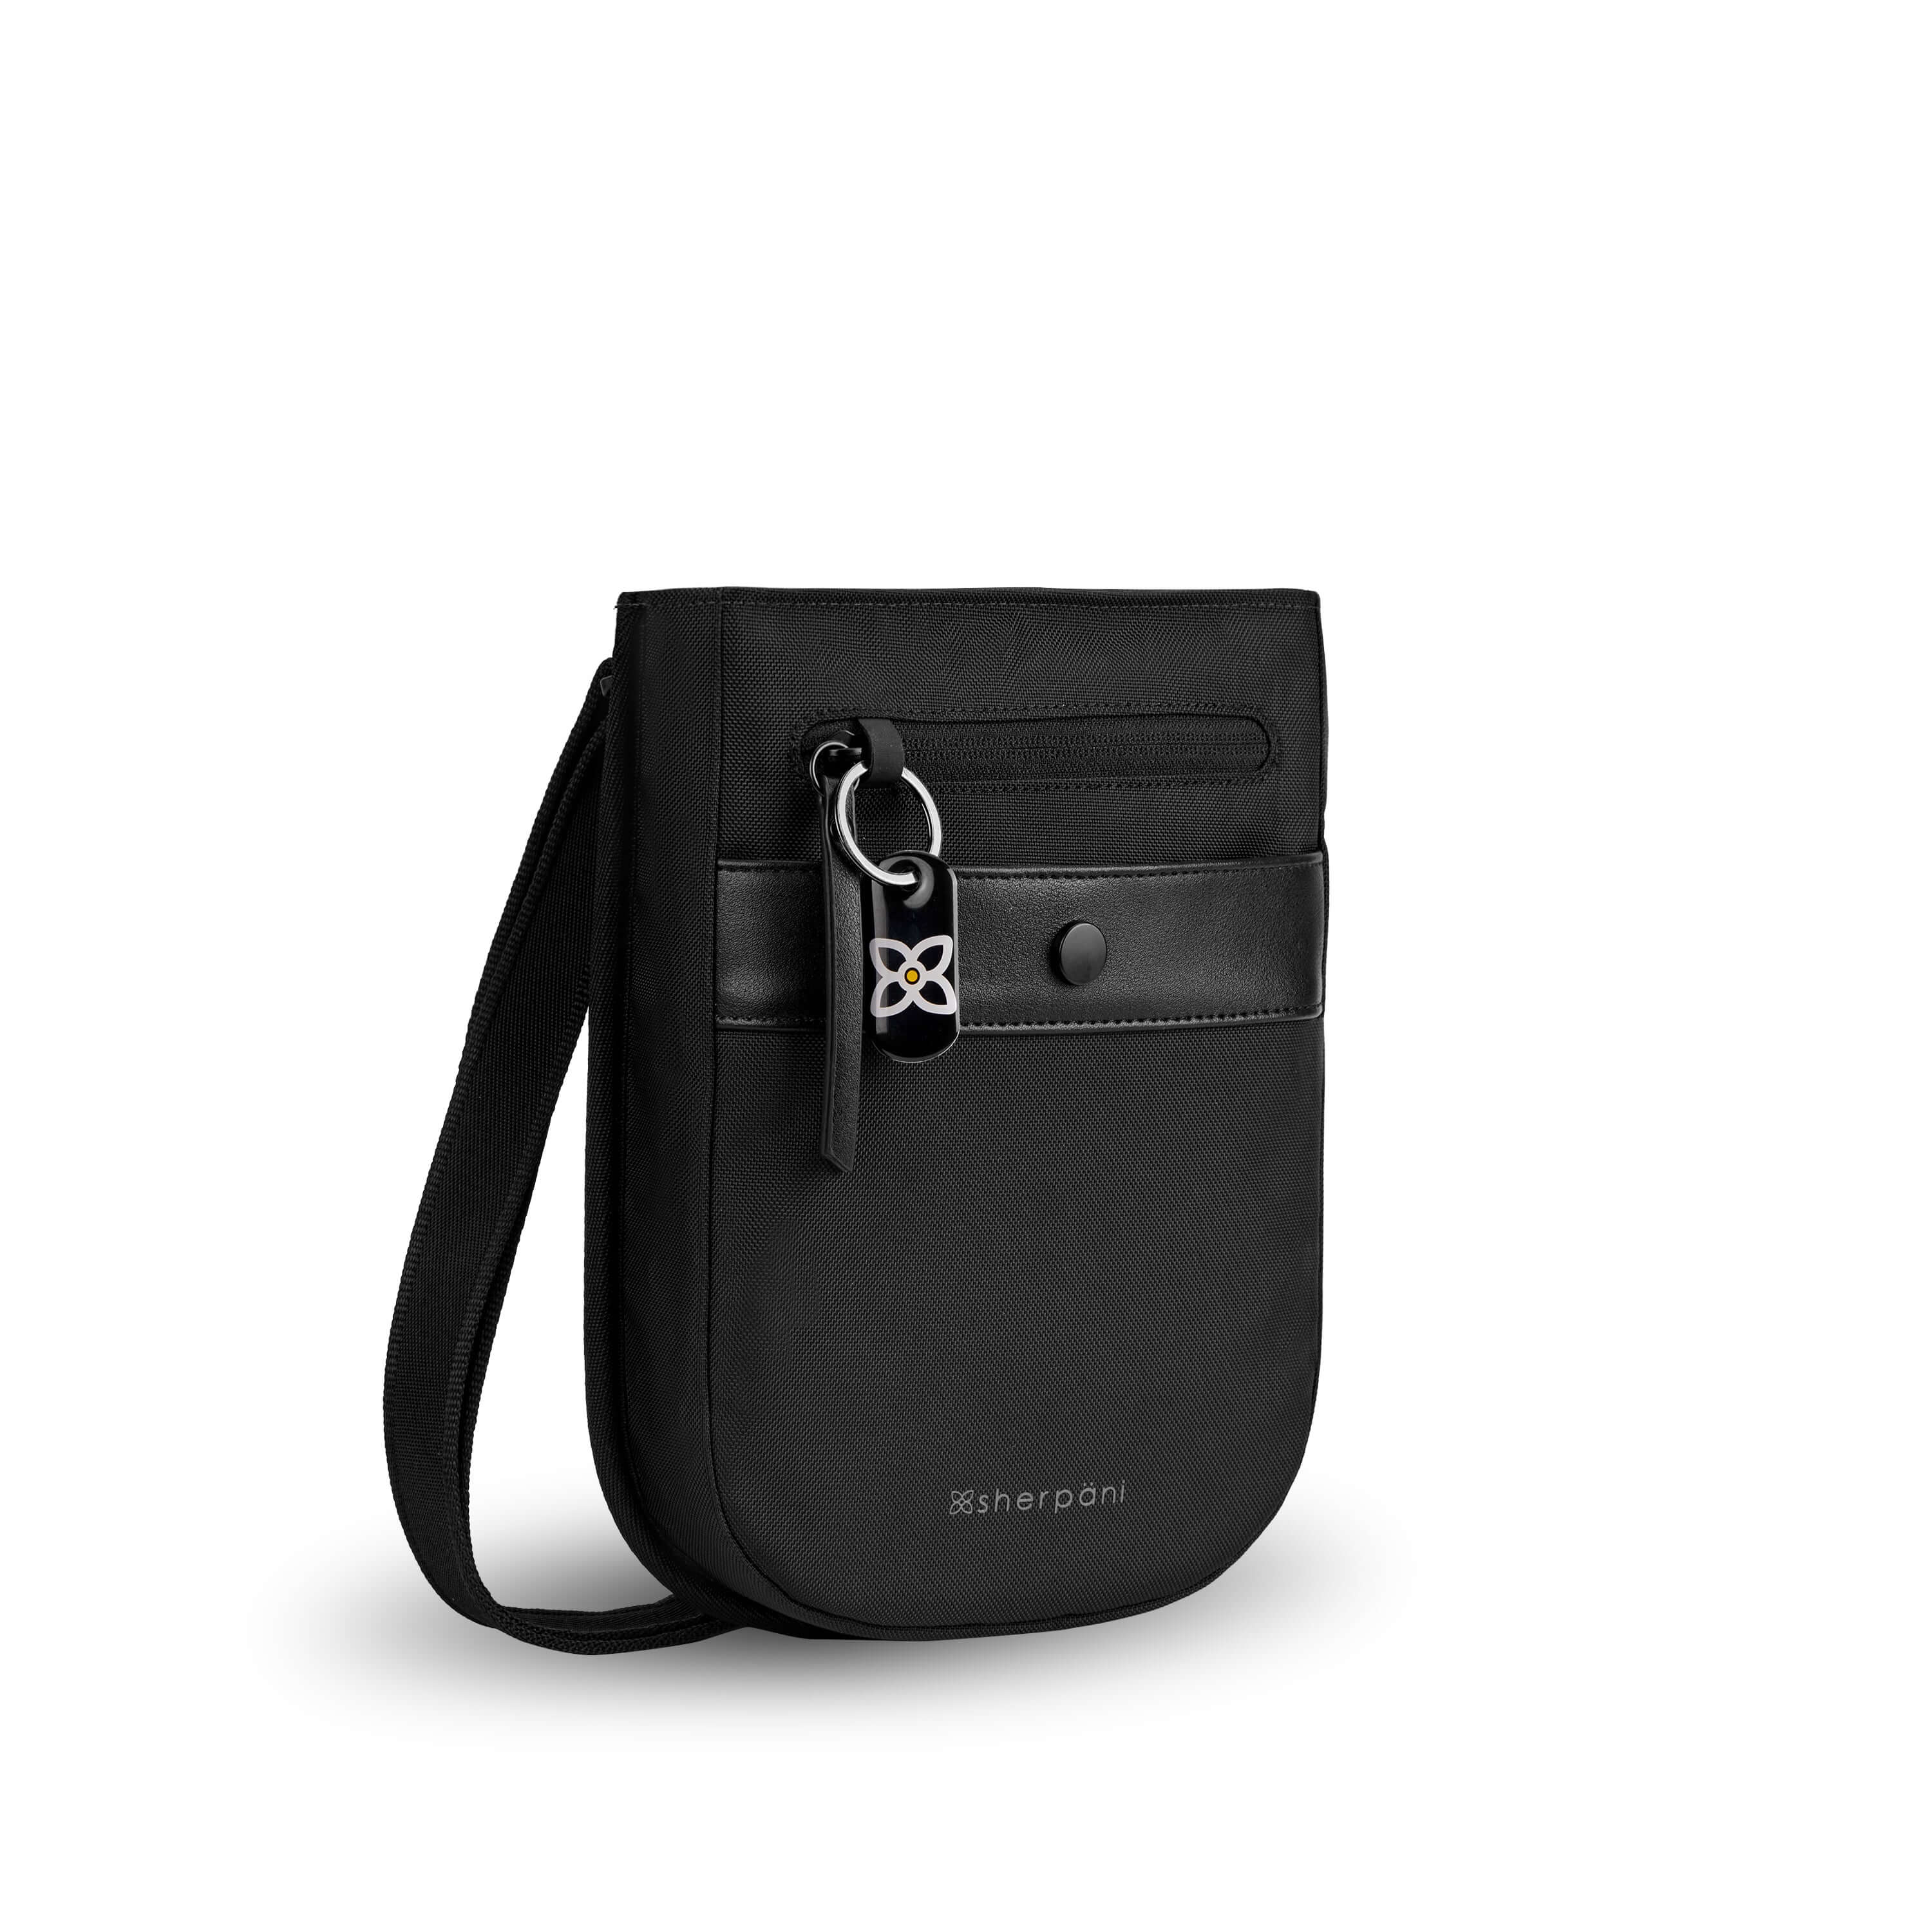 Angled front view of Sherpani’s Anti-Theft bag, the Prima AT in Carbon, with vegan leather accents in black. There is an external pouch on the front of the bag that sits below a locking zipper compartment, which has a ReturnMe tag clipped to it. The bag features an adjustable crossbody strap.